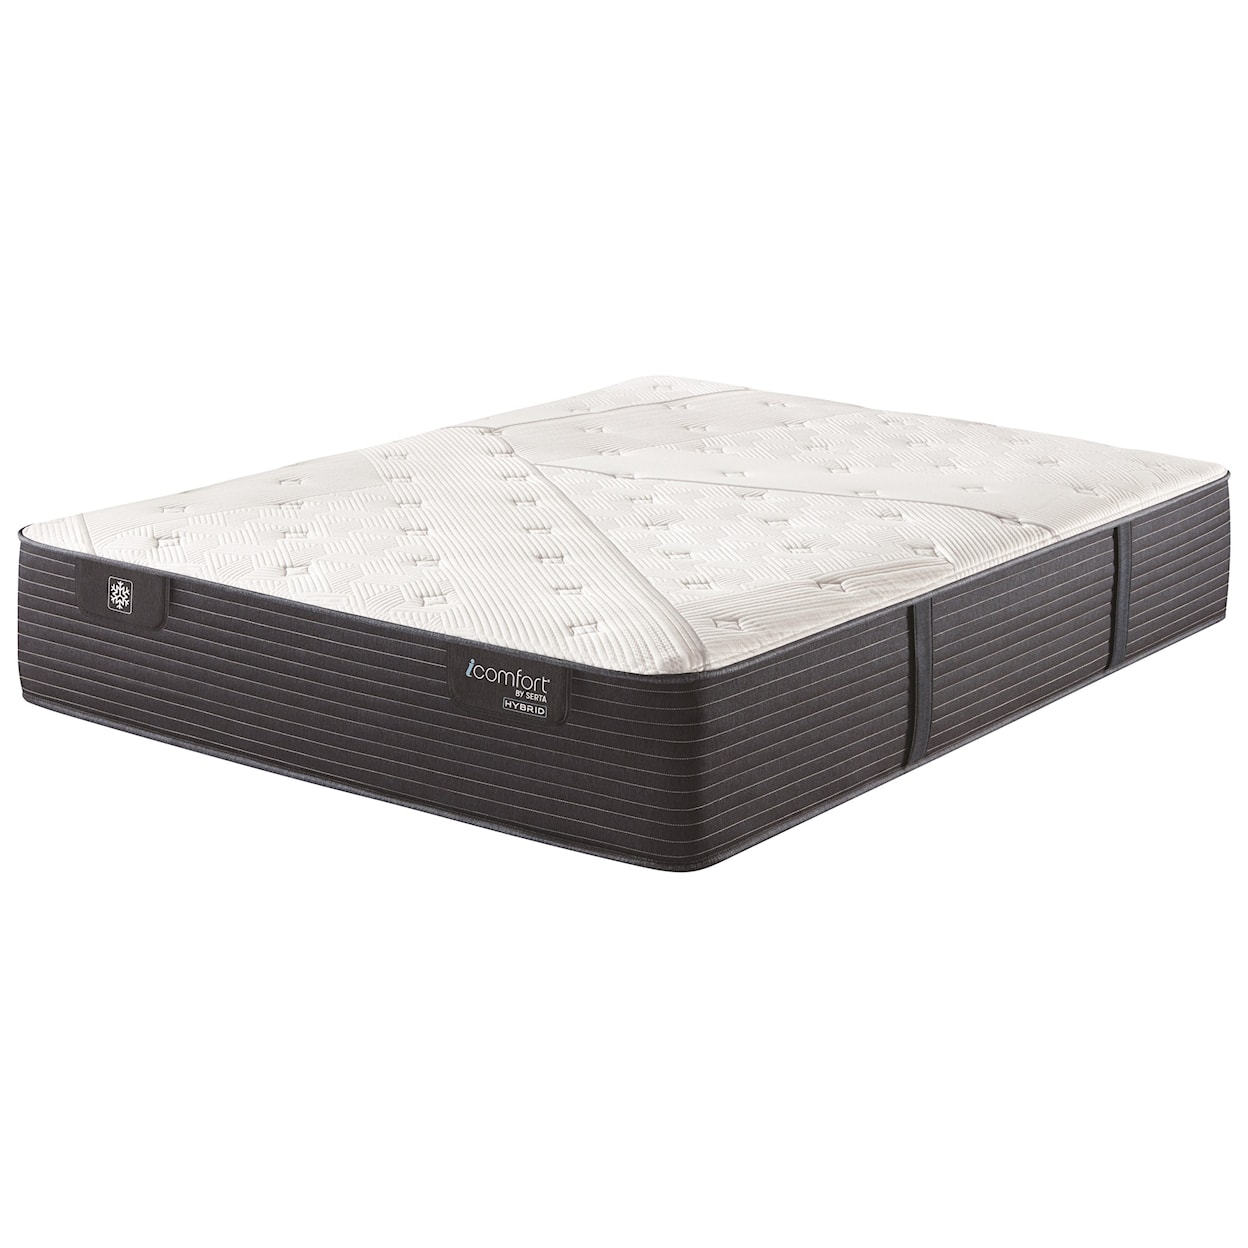 Serta CF1000 Quilted Hybrid II Firm Twin 13" Firm Quilted Hybrid Mattress